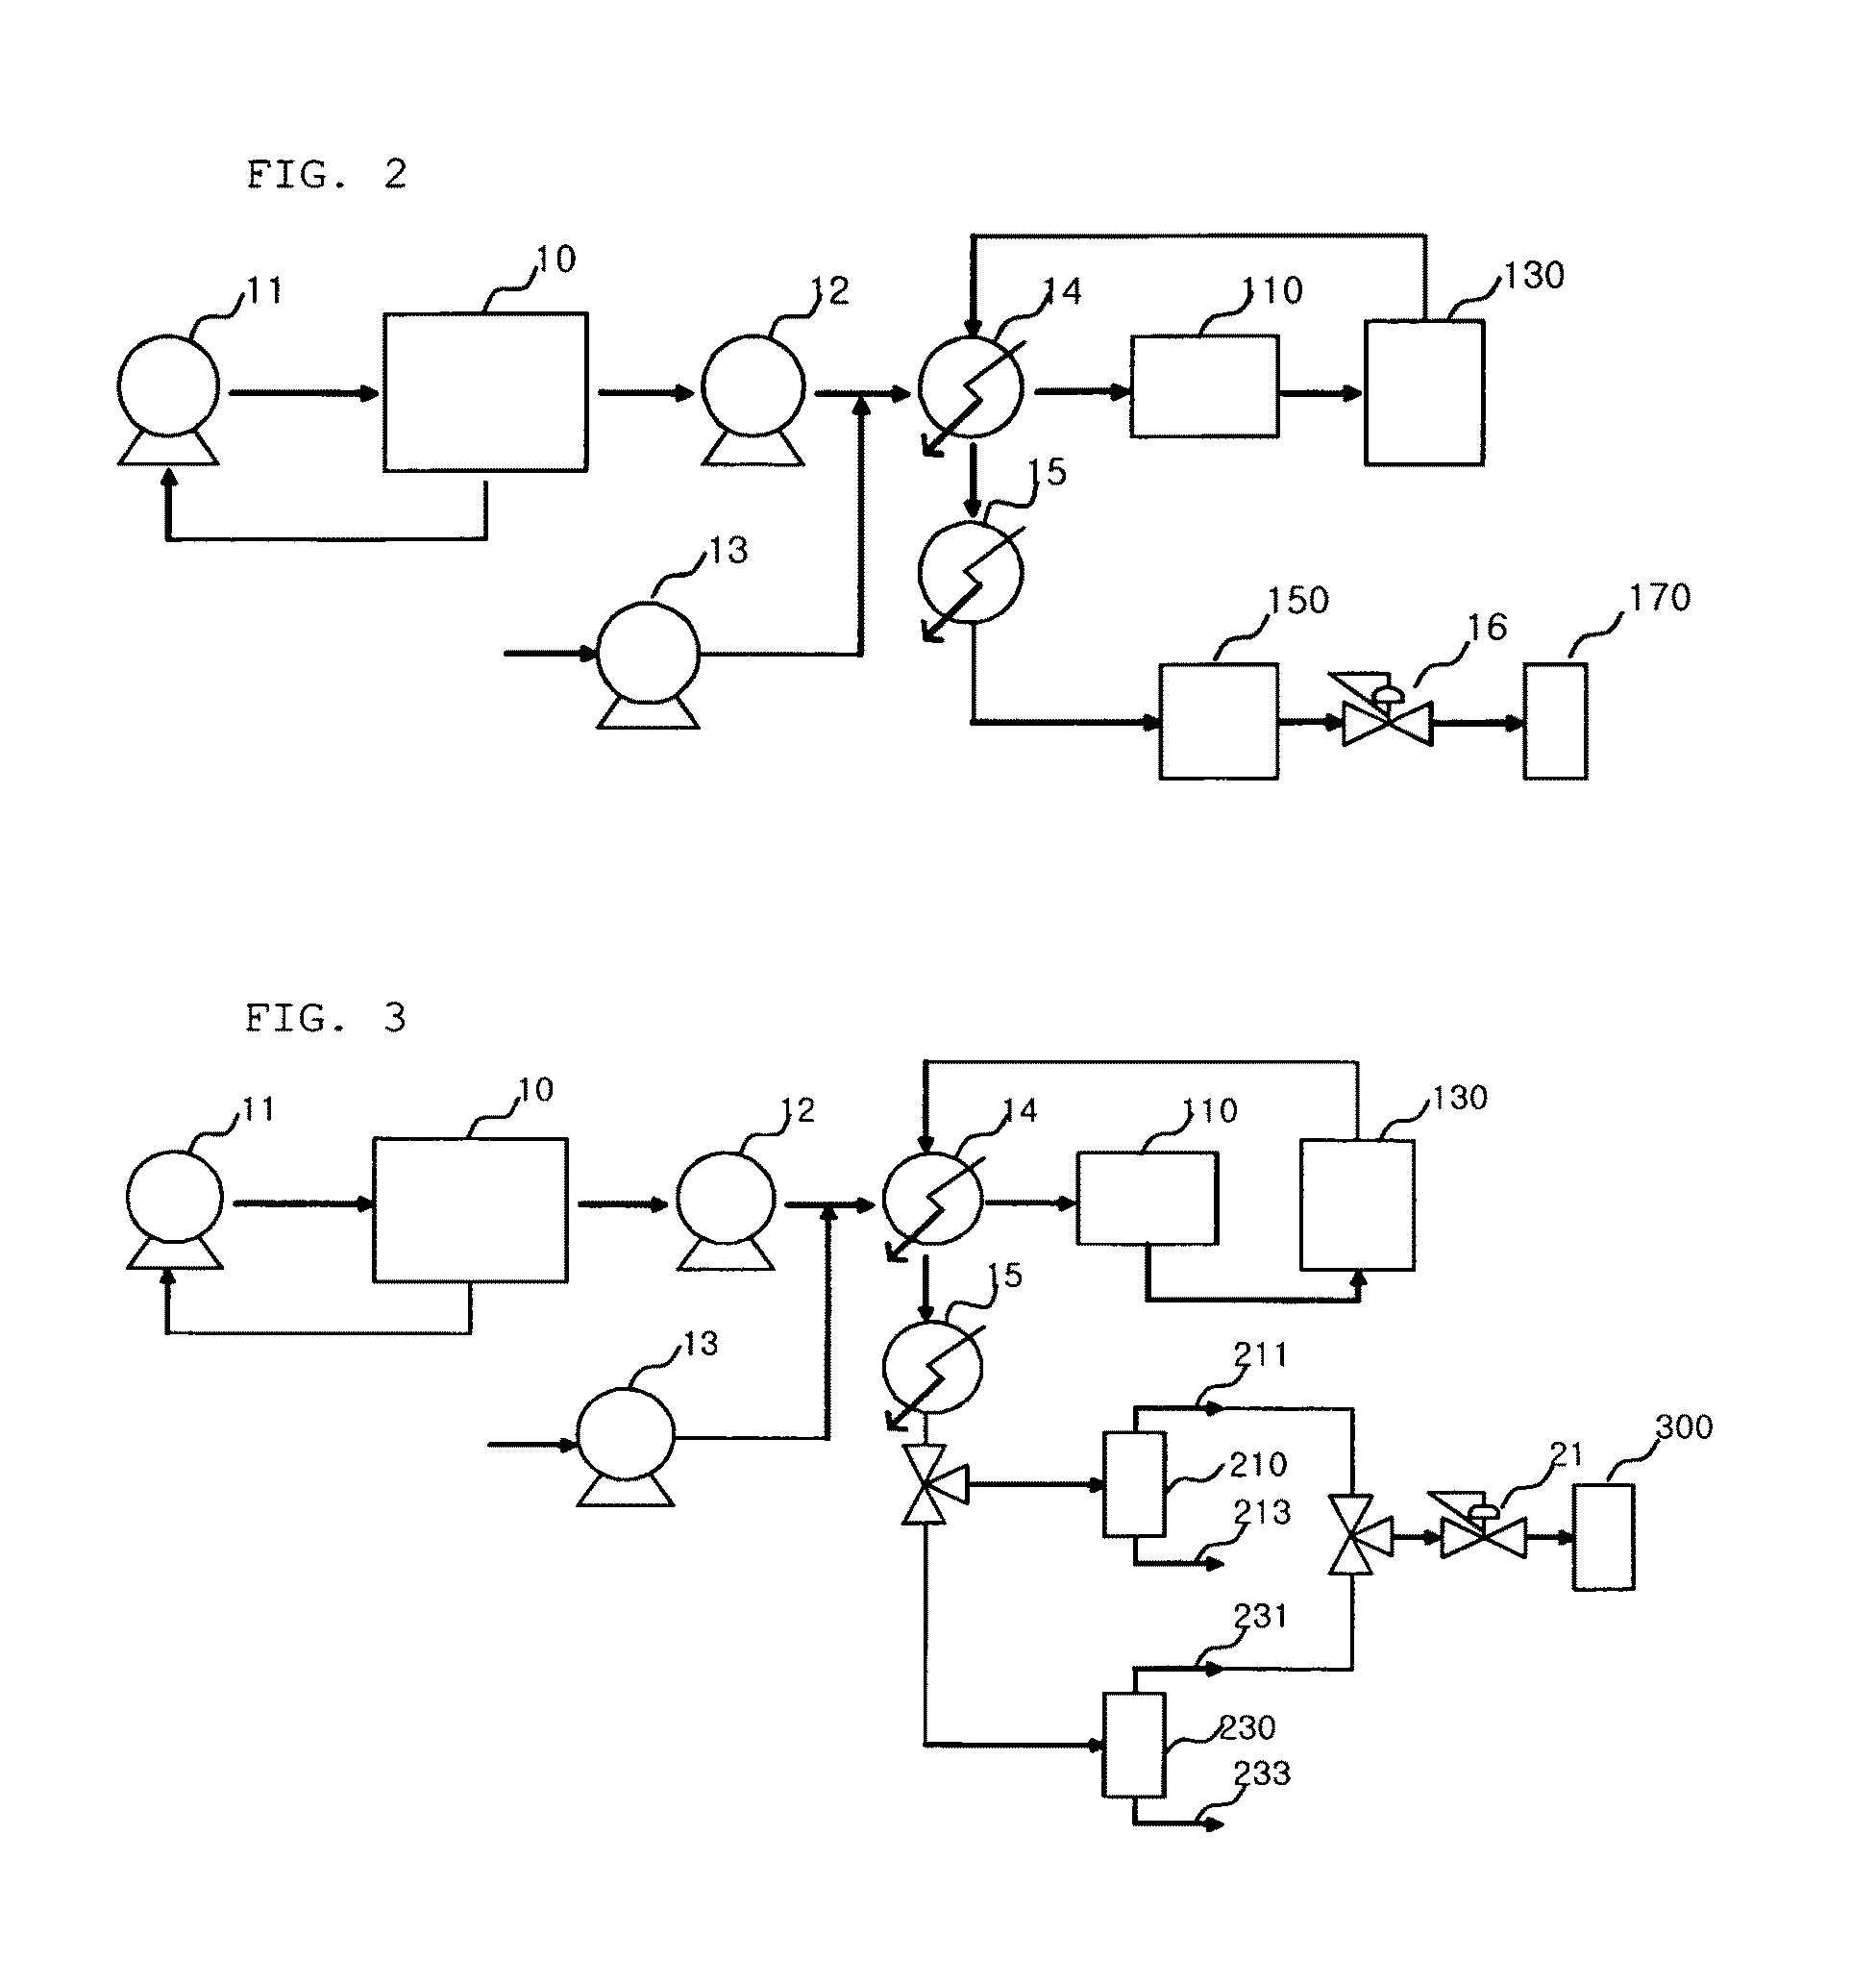 Continuous methods and apparatus of functionalizing carbon nanotube